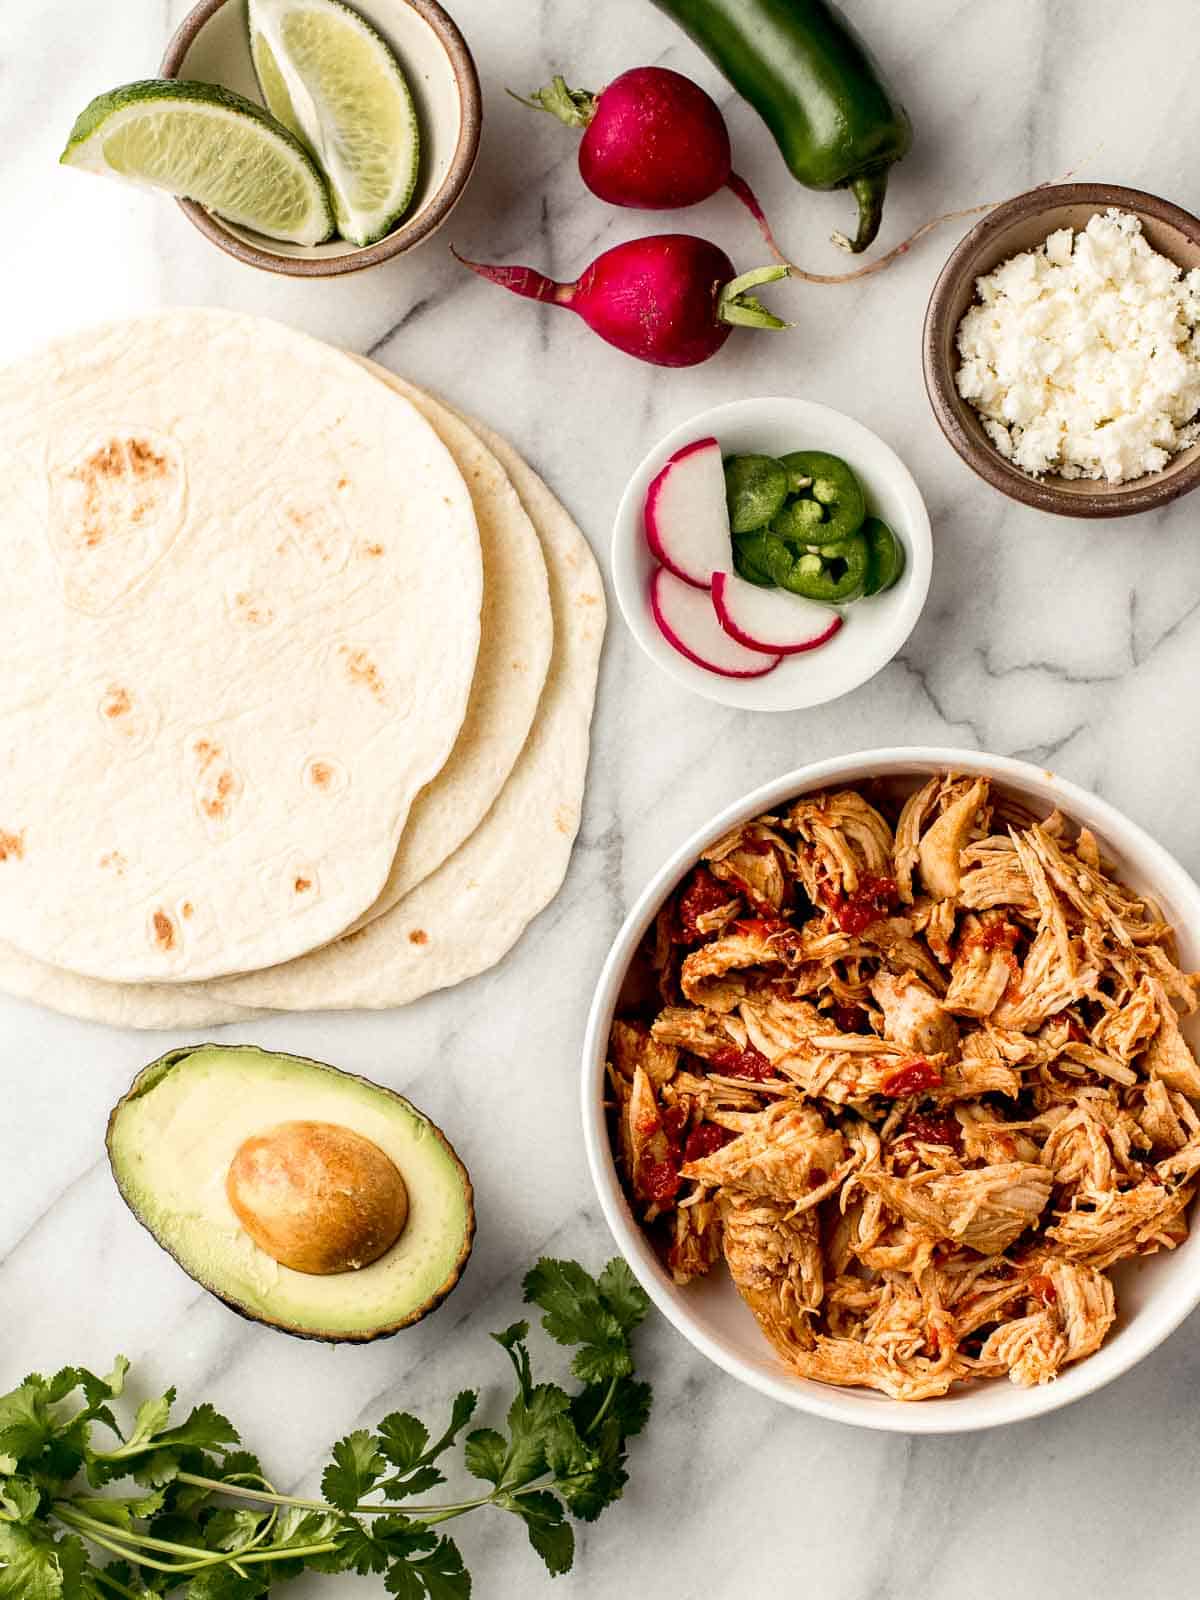 Mexican Shredded Chicken tacos ingredients on a table.